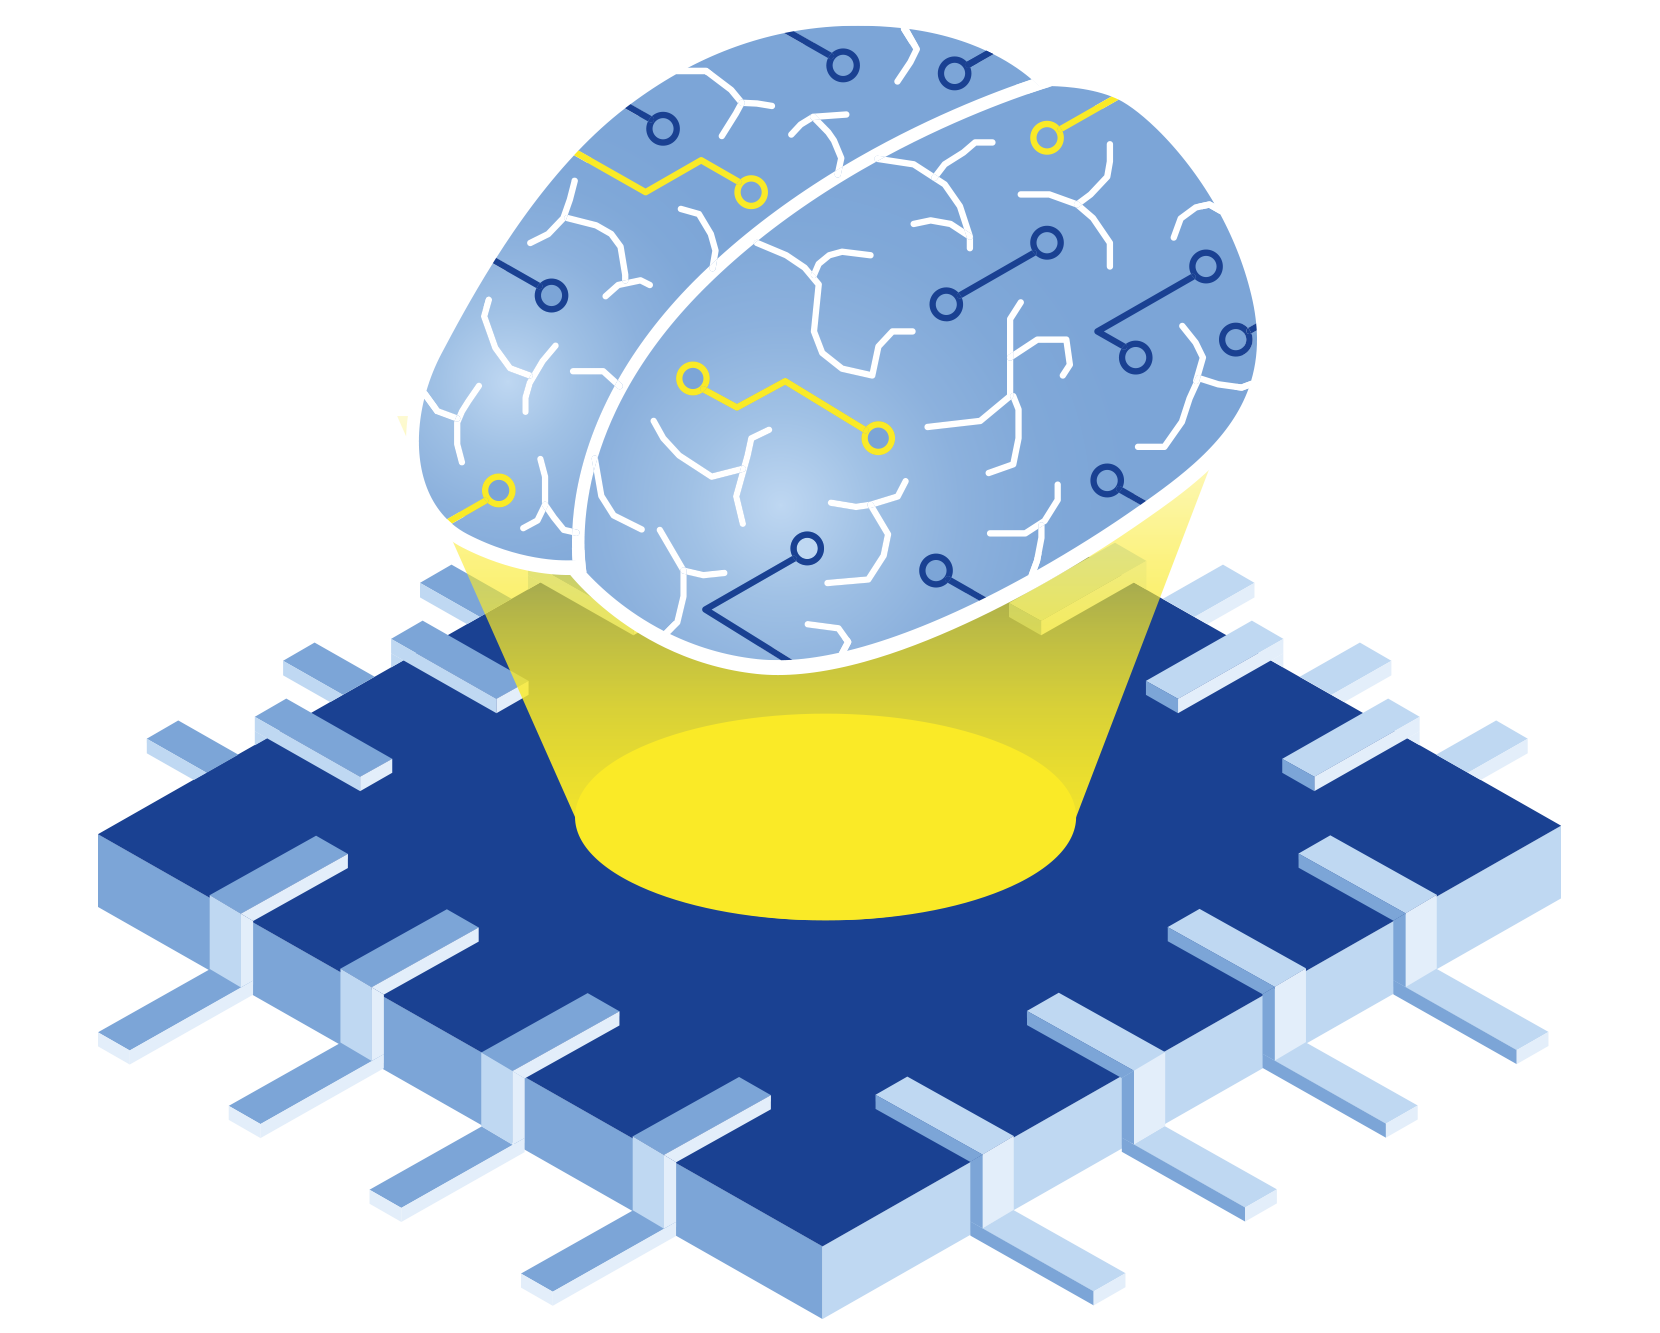 Isometric illustration of a computer chip with a brain